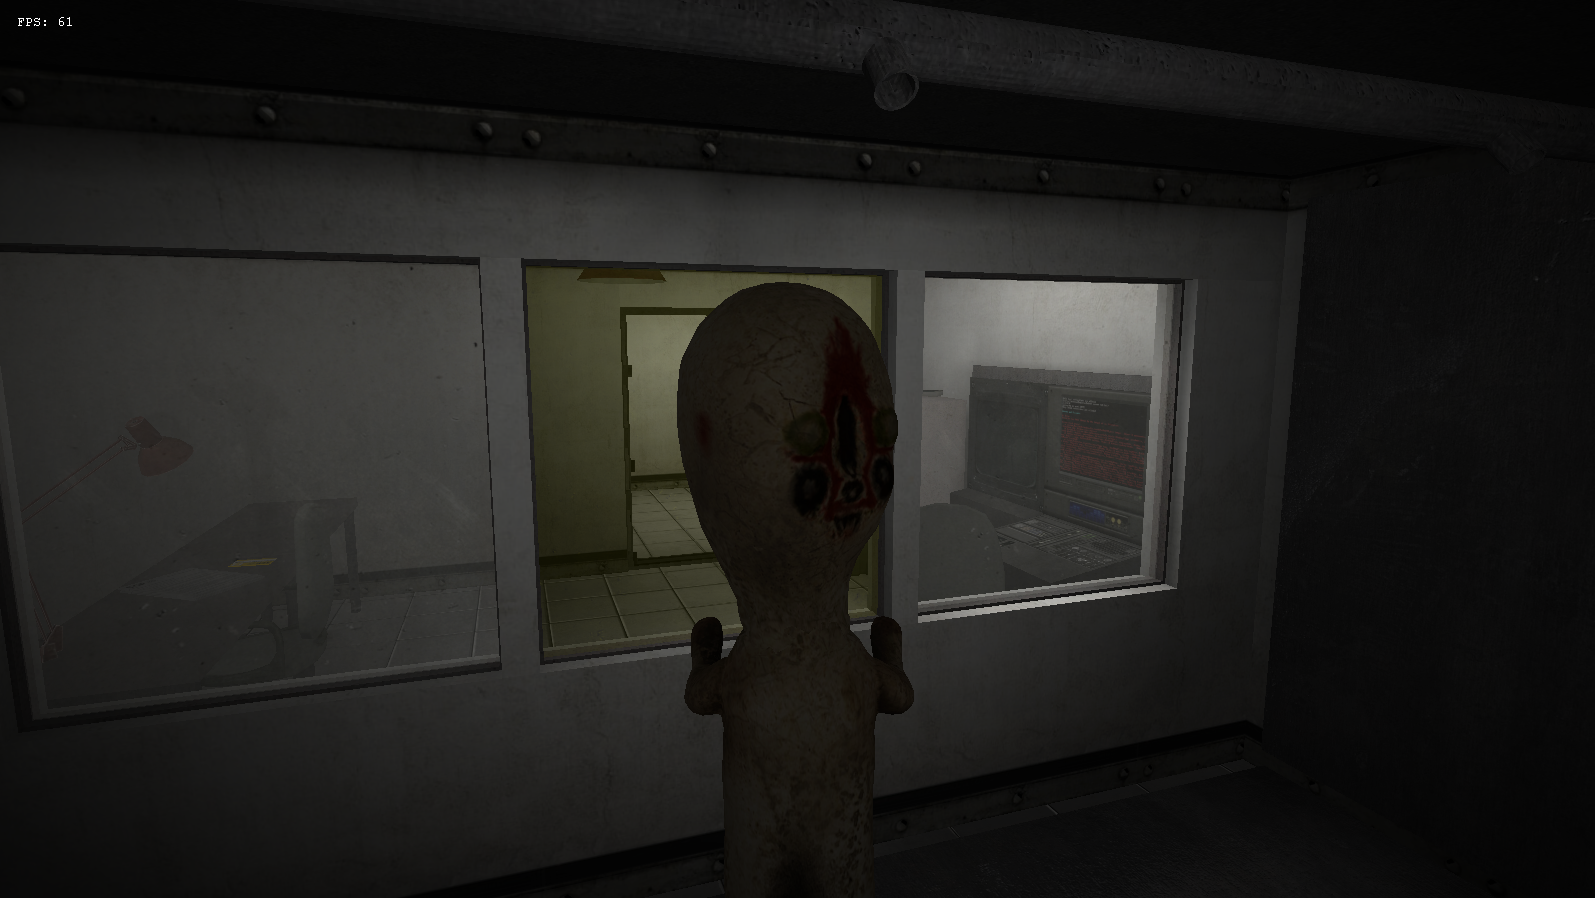 SCP Foundation SCP – Containment Breach Garry's Mod Wiki Desktop, others,  png